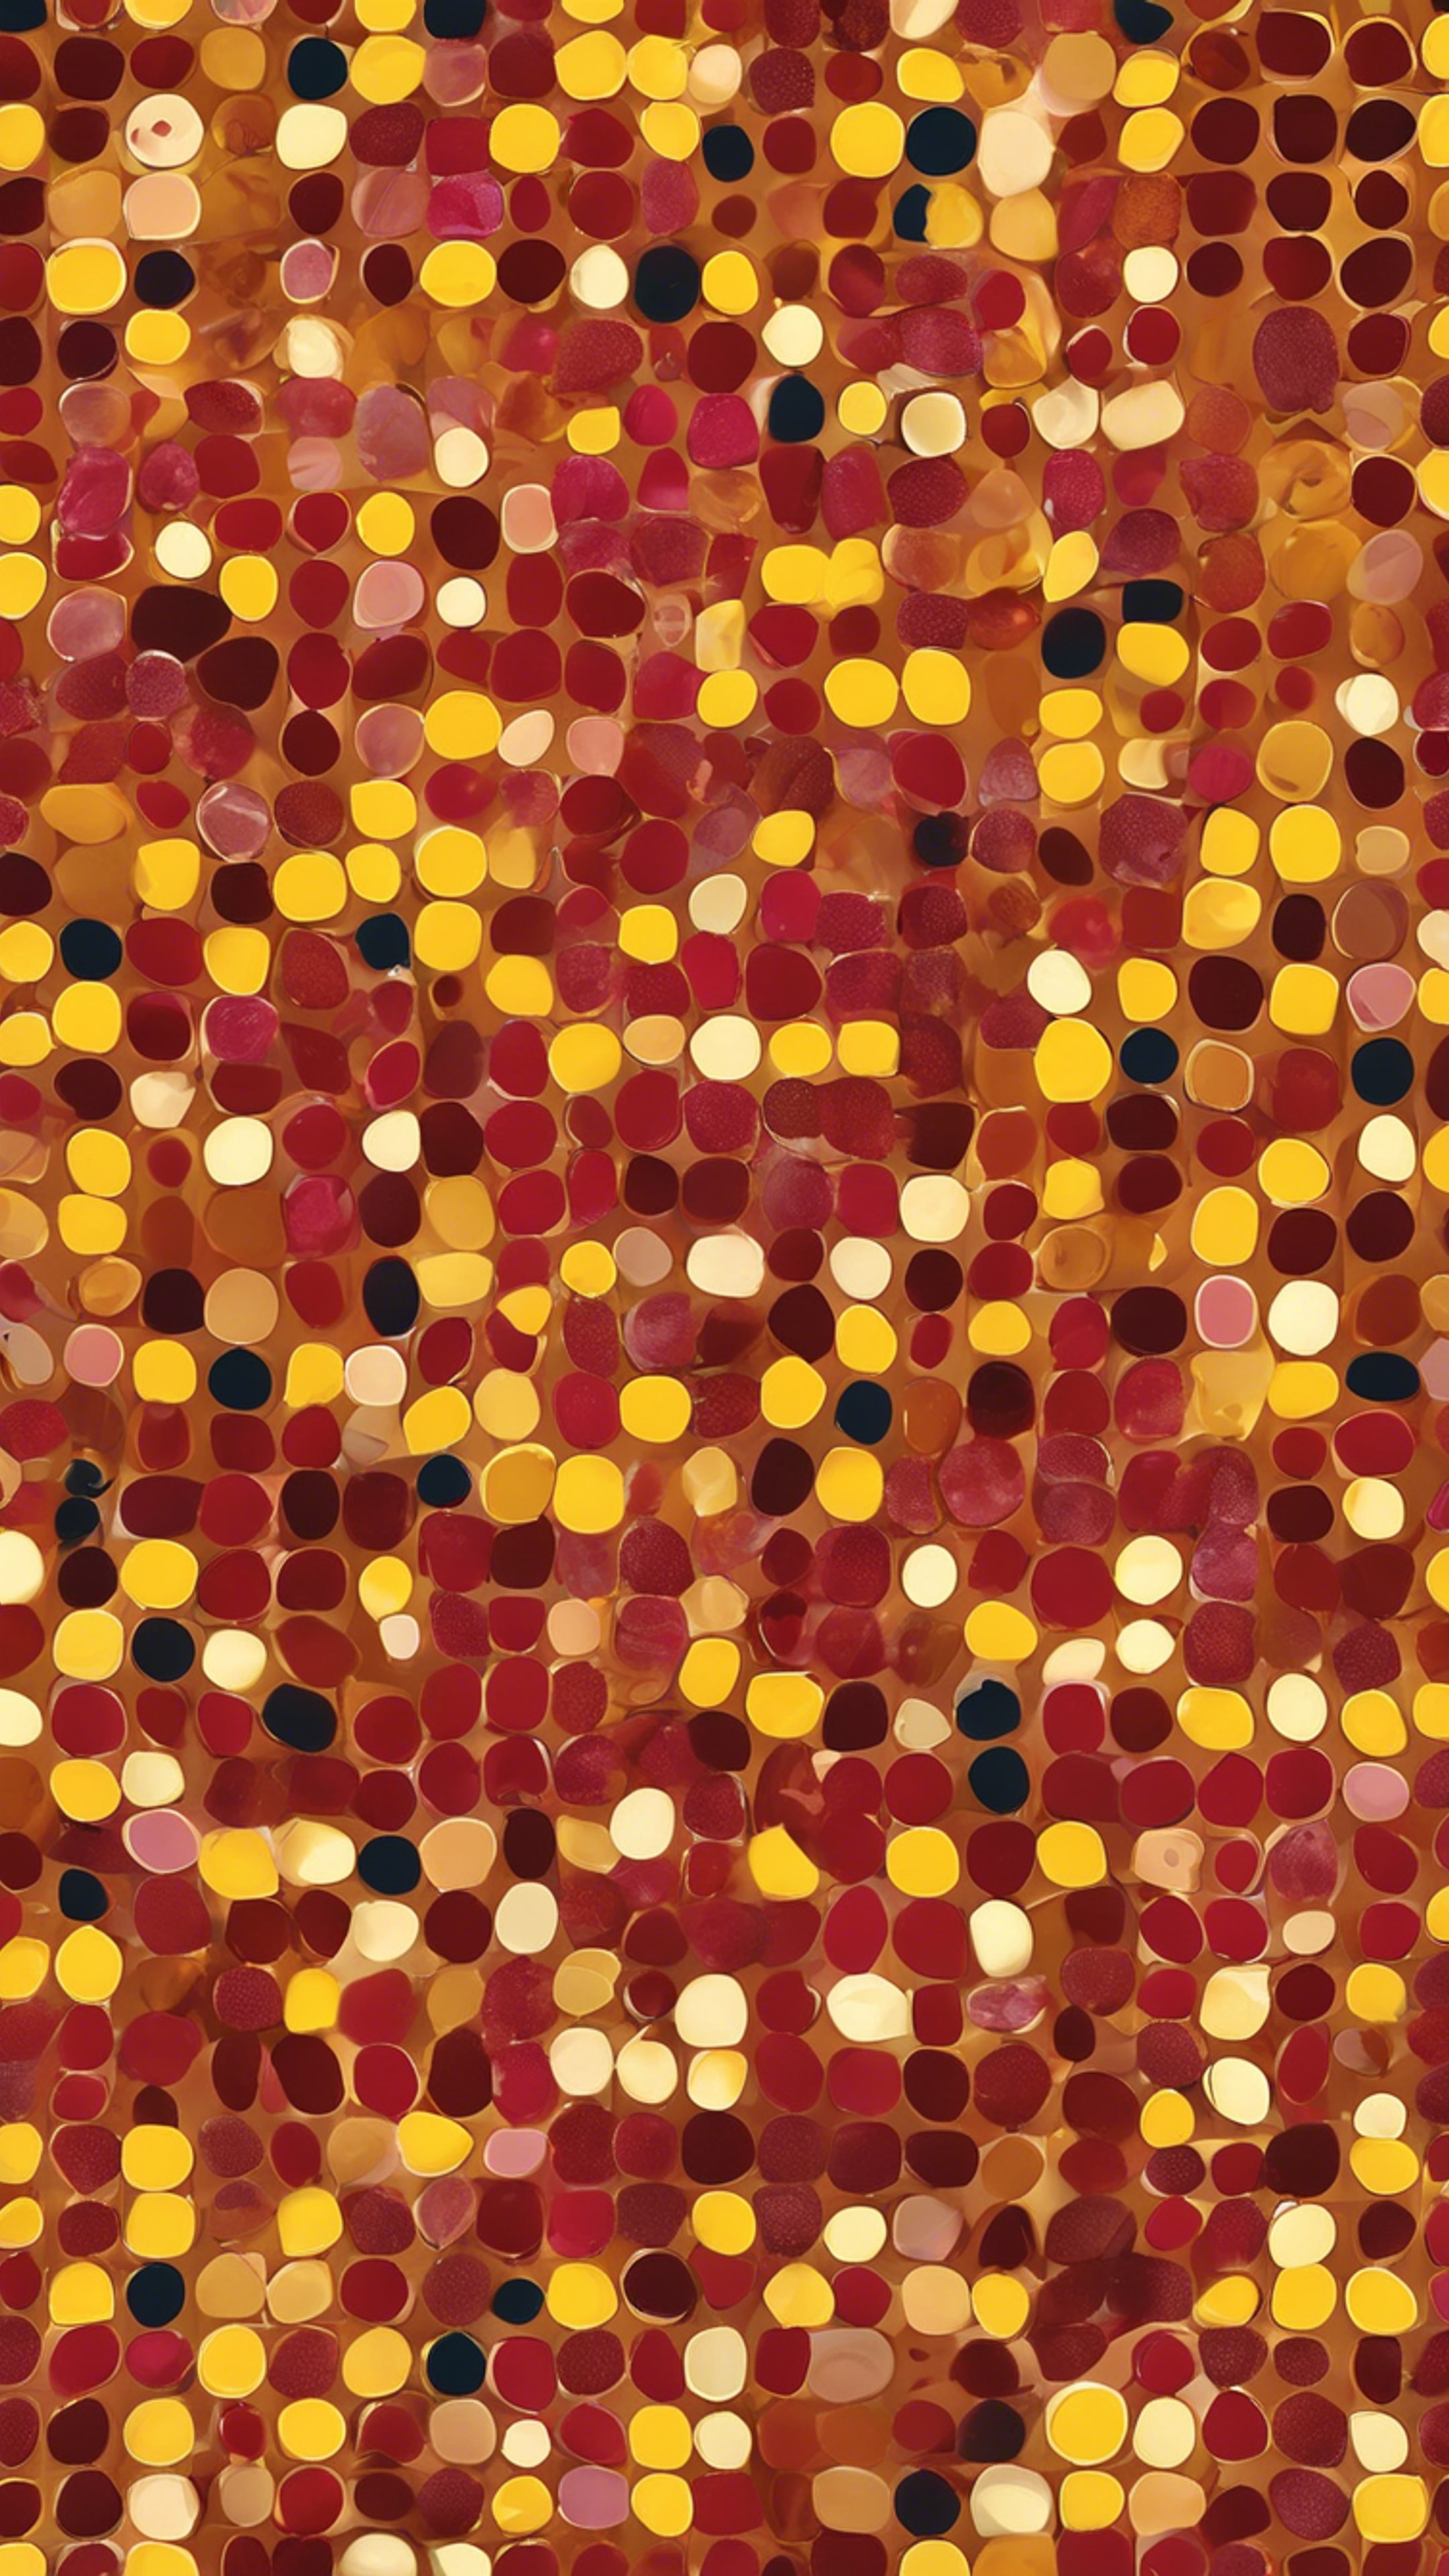 Vibrant pattern of polka dots, a mix of ruby red ones and mustard yellow ones. Tapeta[8e468345fc0d4ef4ba5a]